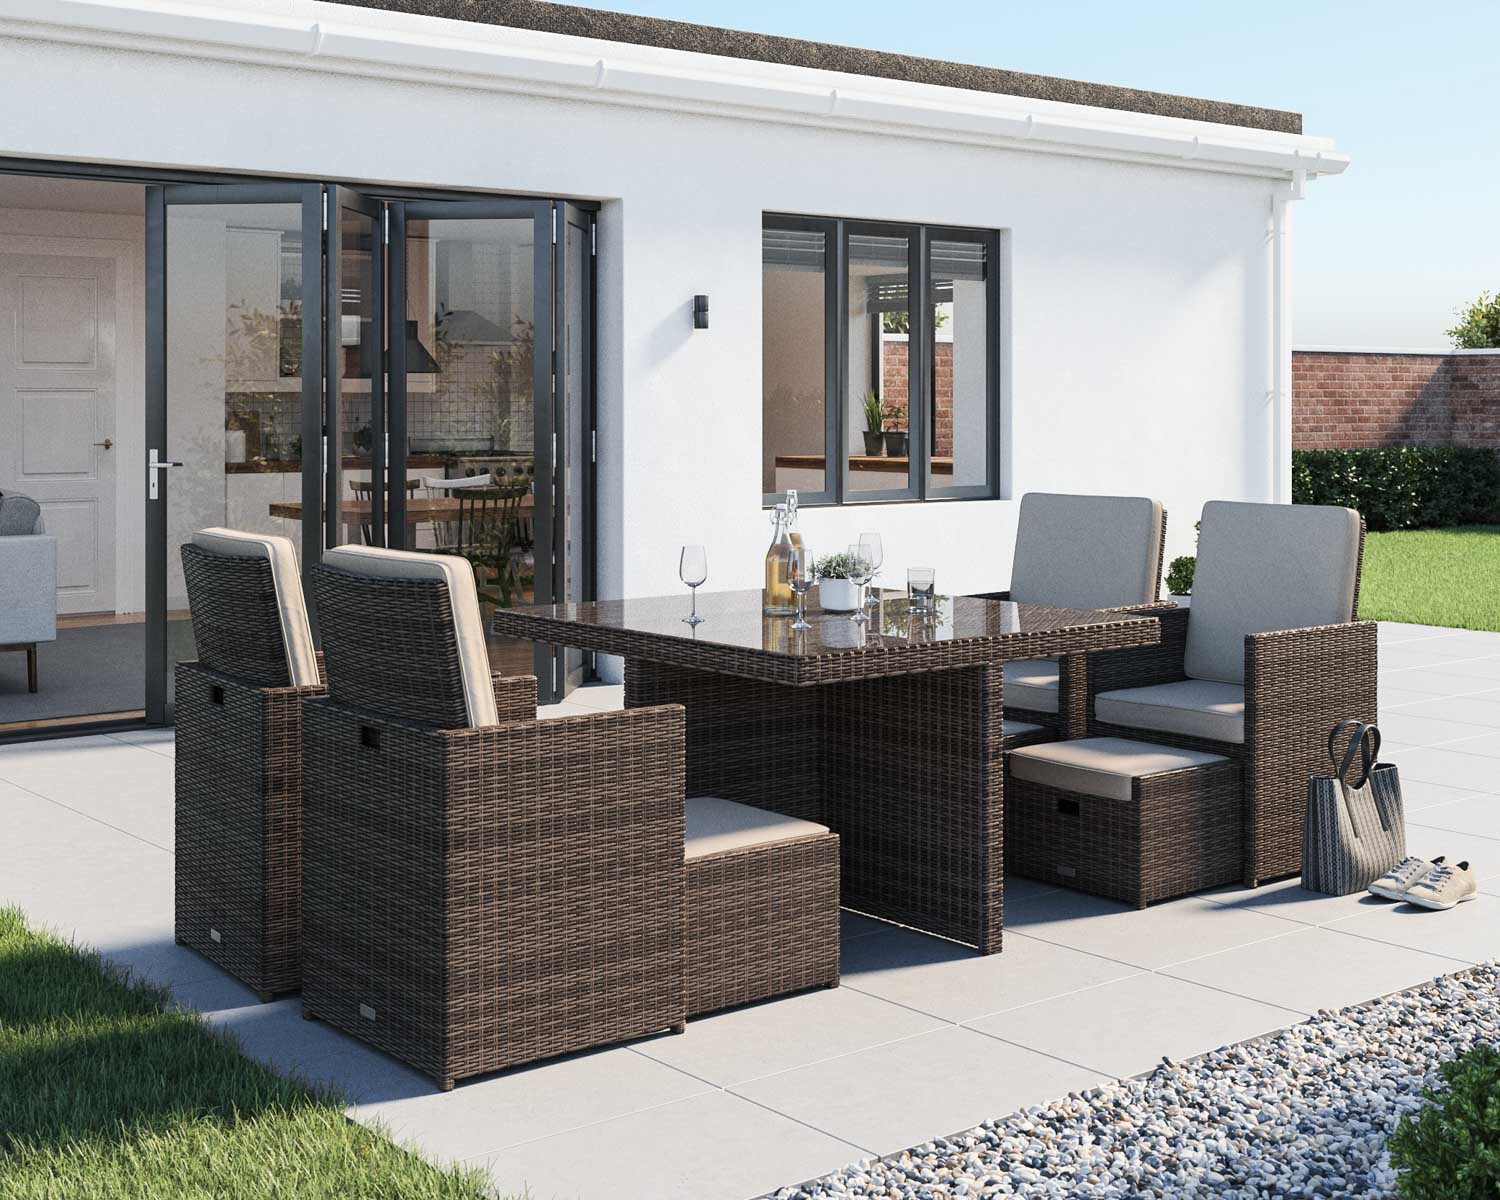 4 Seat Rattan Garden Cube Dining Set In Truffle Brown With Footstools Barcelona Rattan Direct